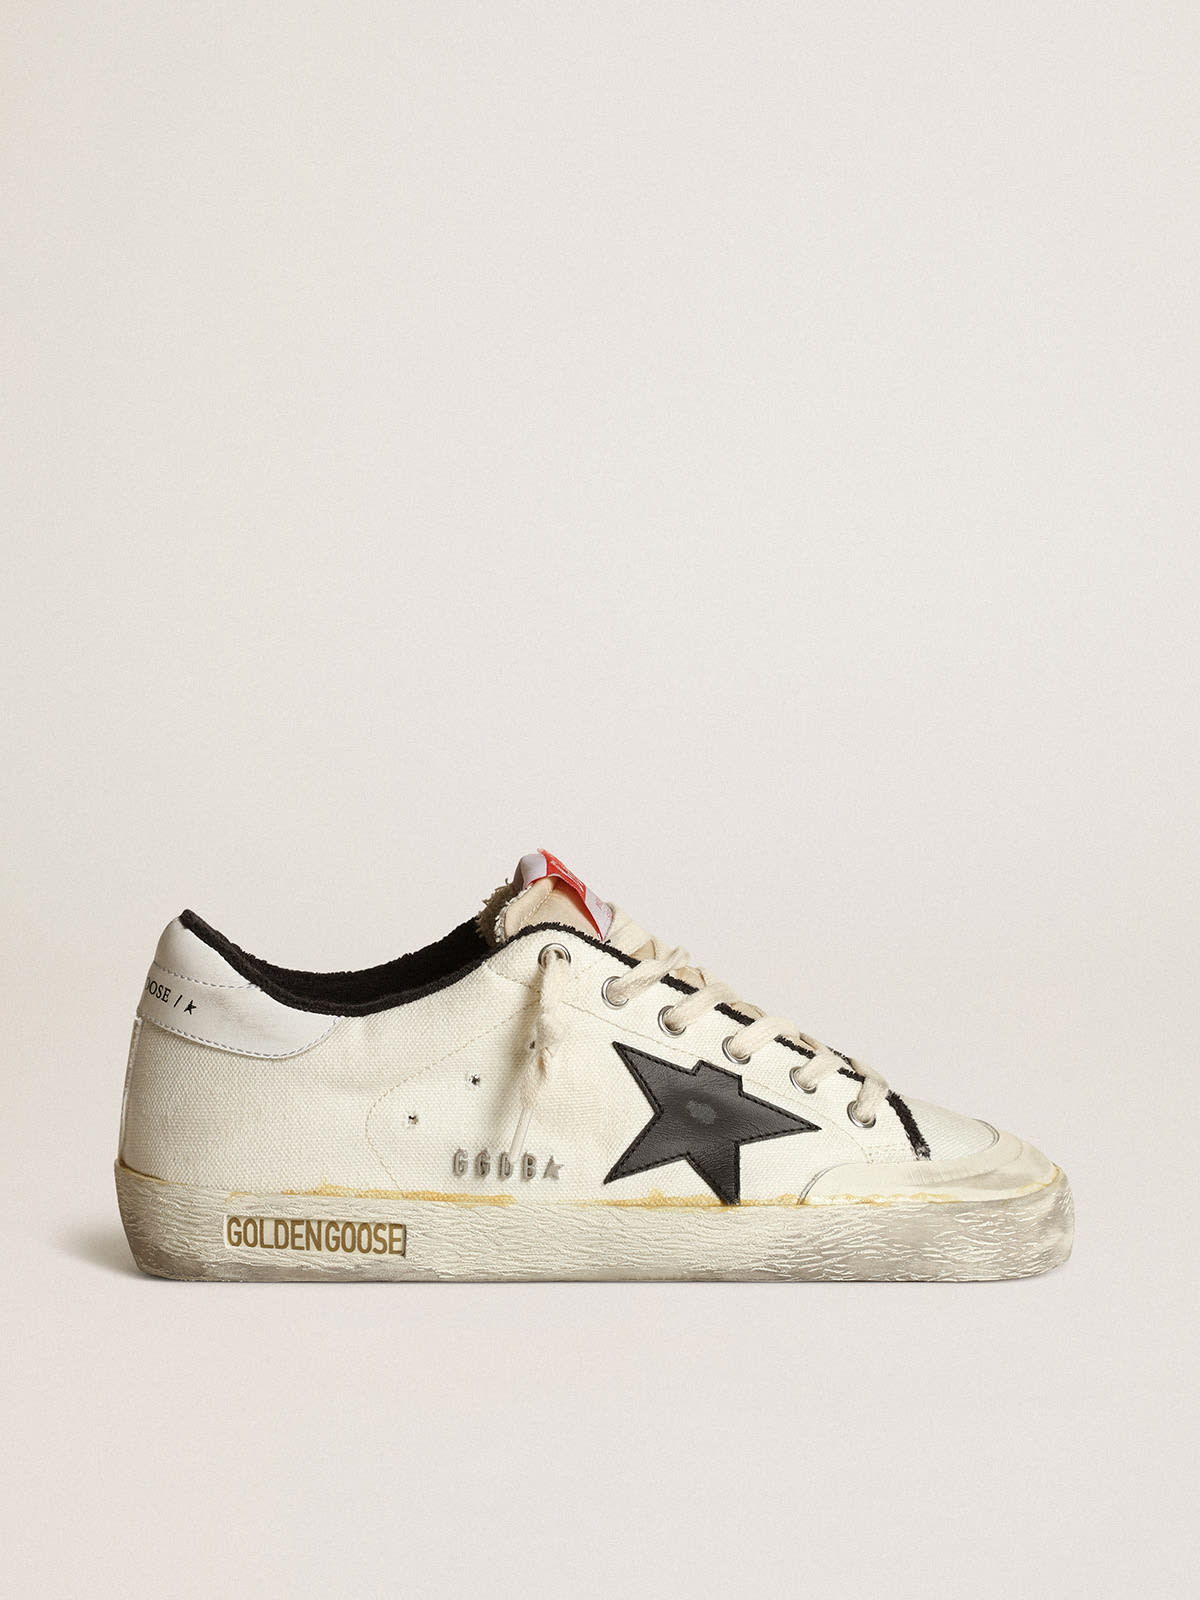 golden goose sneakers Women’s with black canvas white Super-Star leather in heel beige tab and star LTD